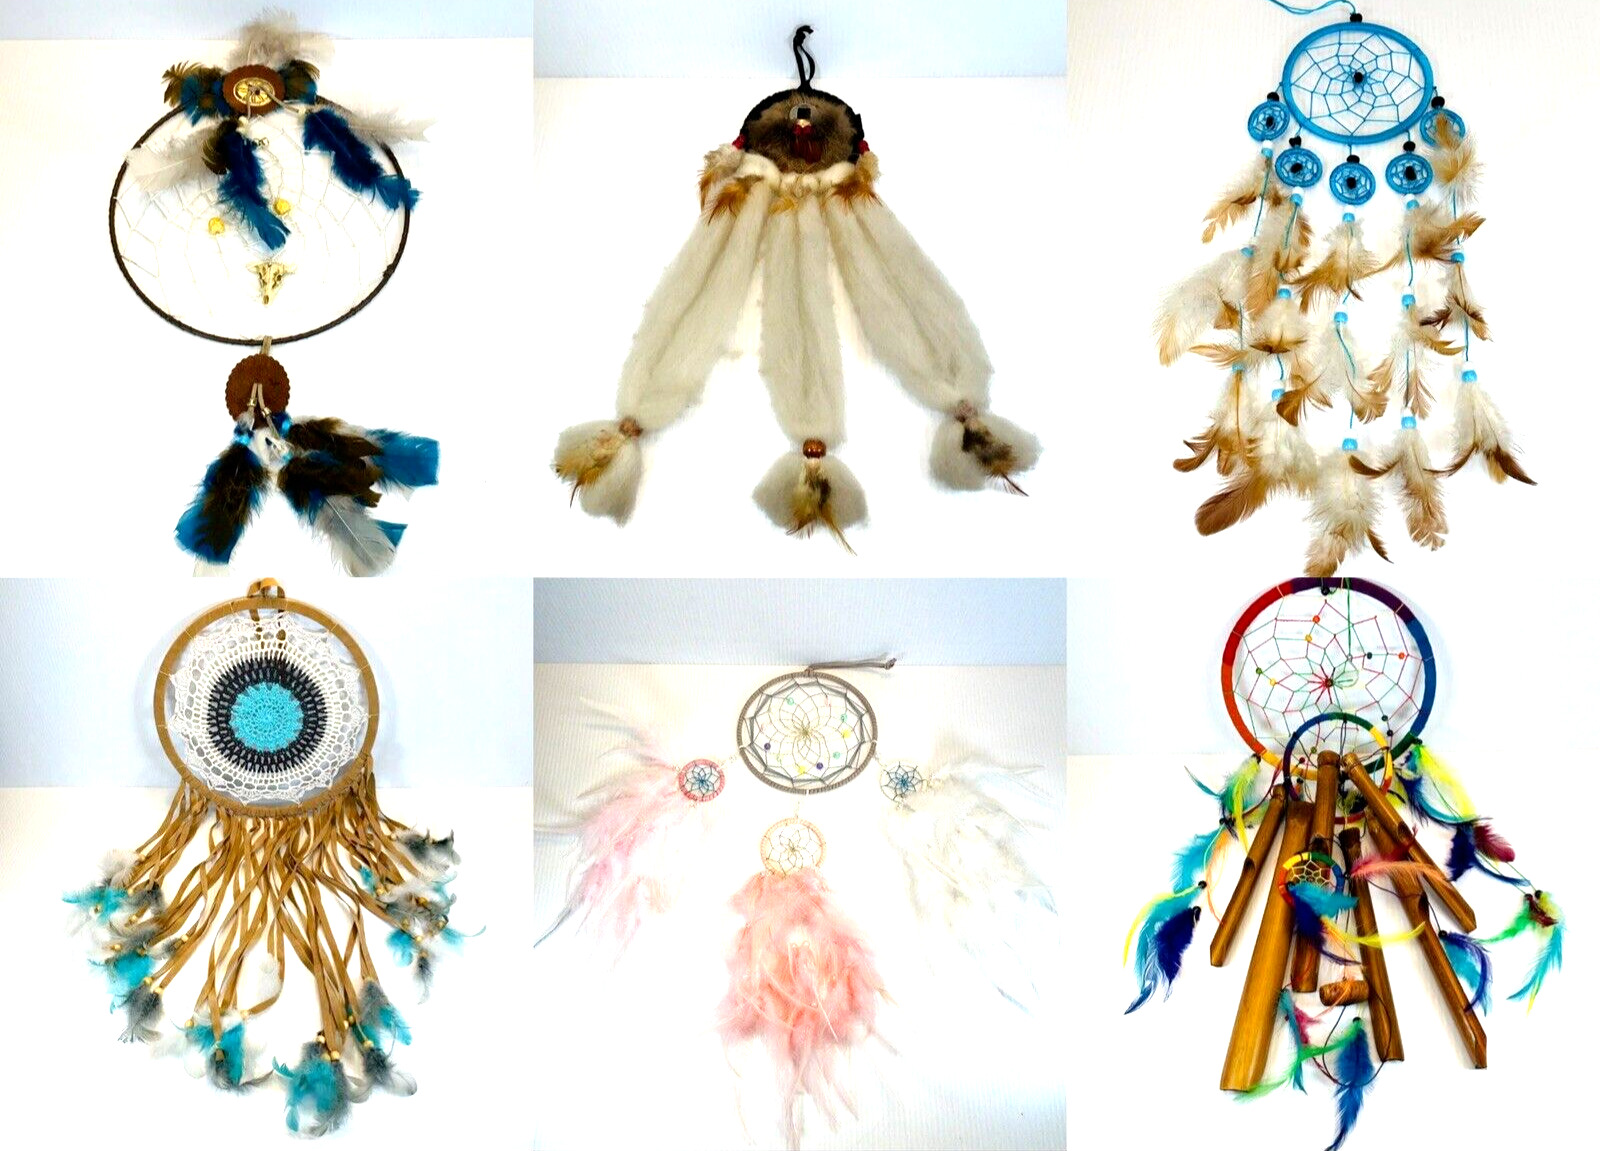 Lot of 6 Colorful & Detailed (Unbranded) Dream Catchers - Bohemian Hippy Design